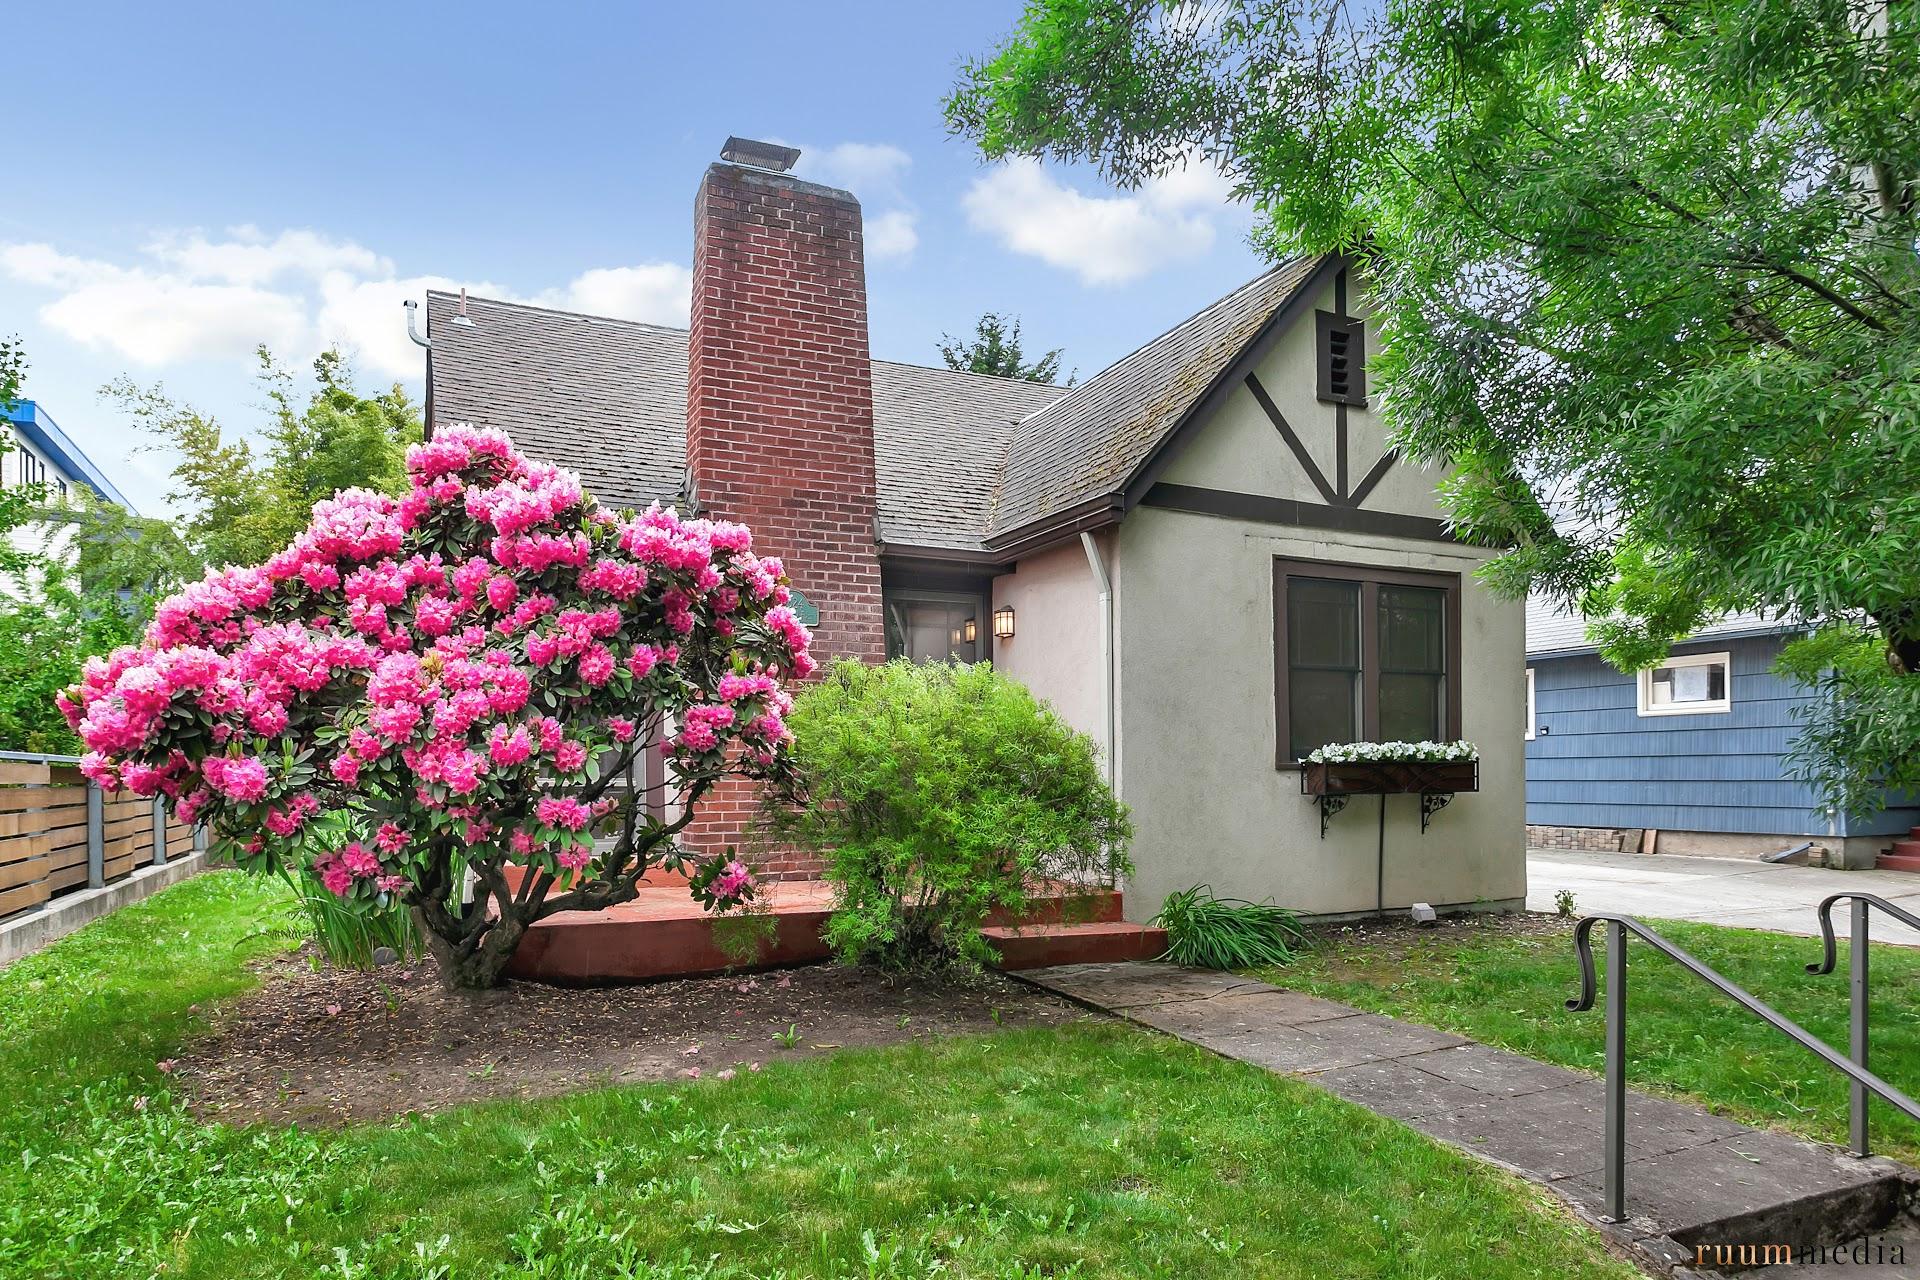 Charming English Cottage in Richmond, SOLD in 5 Days!